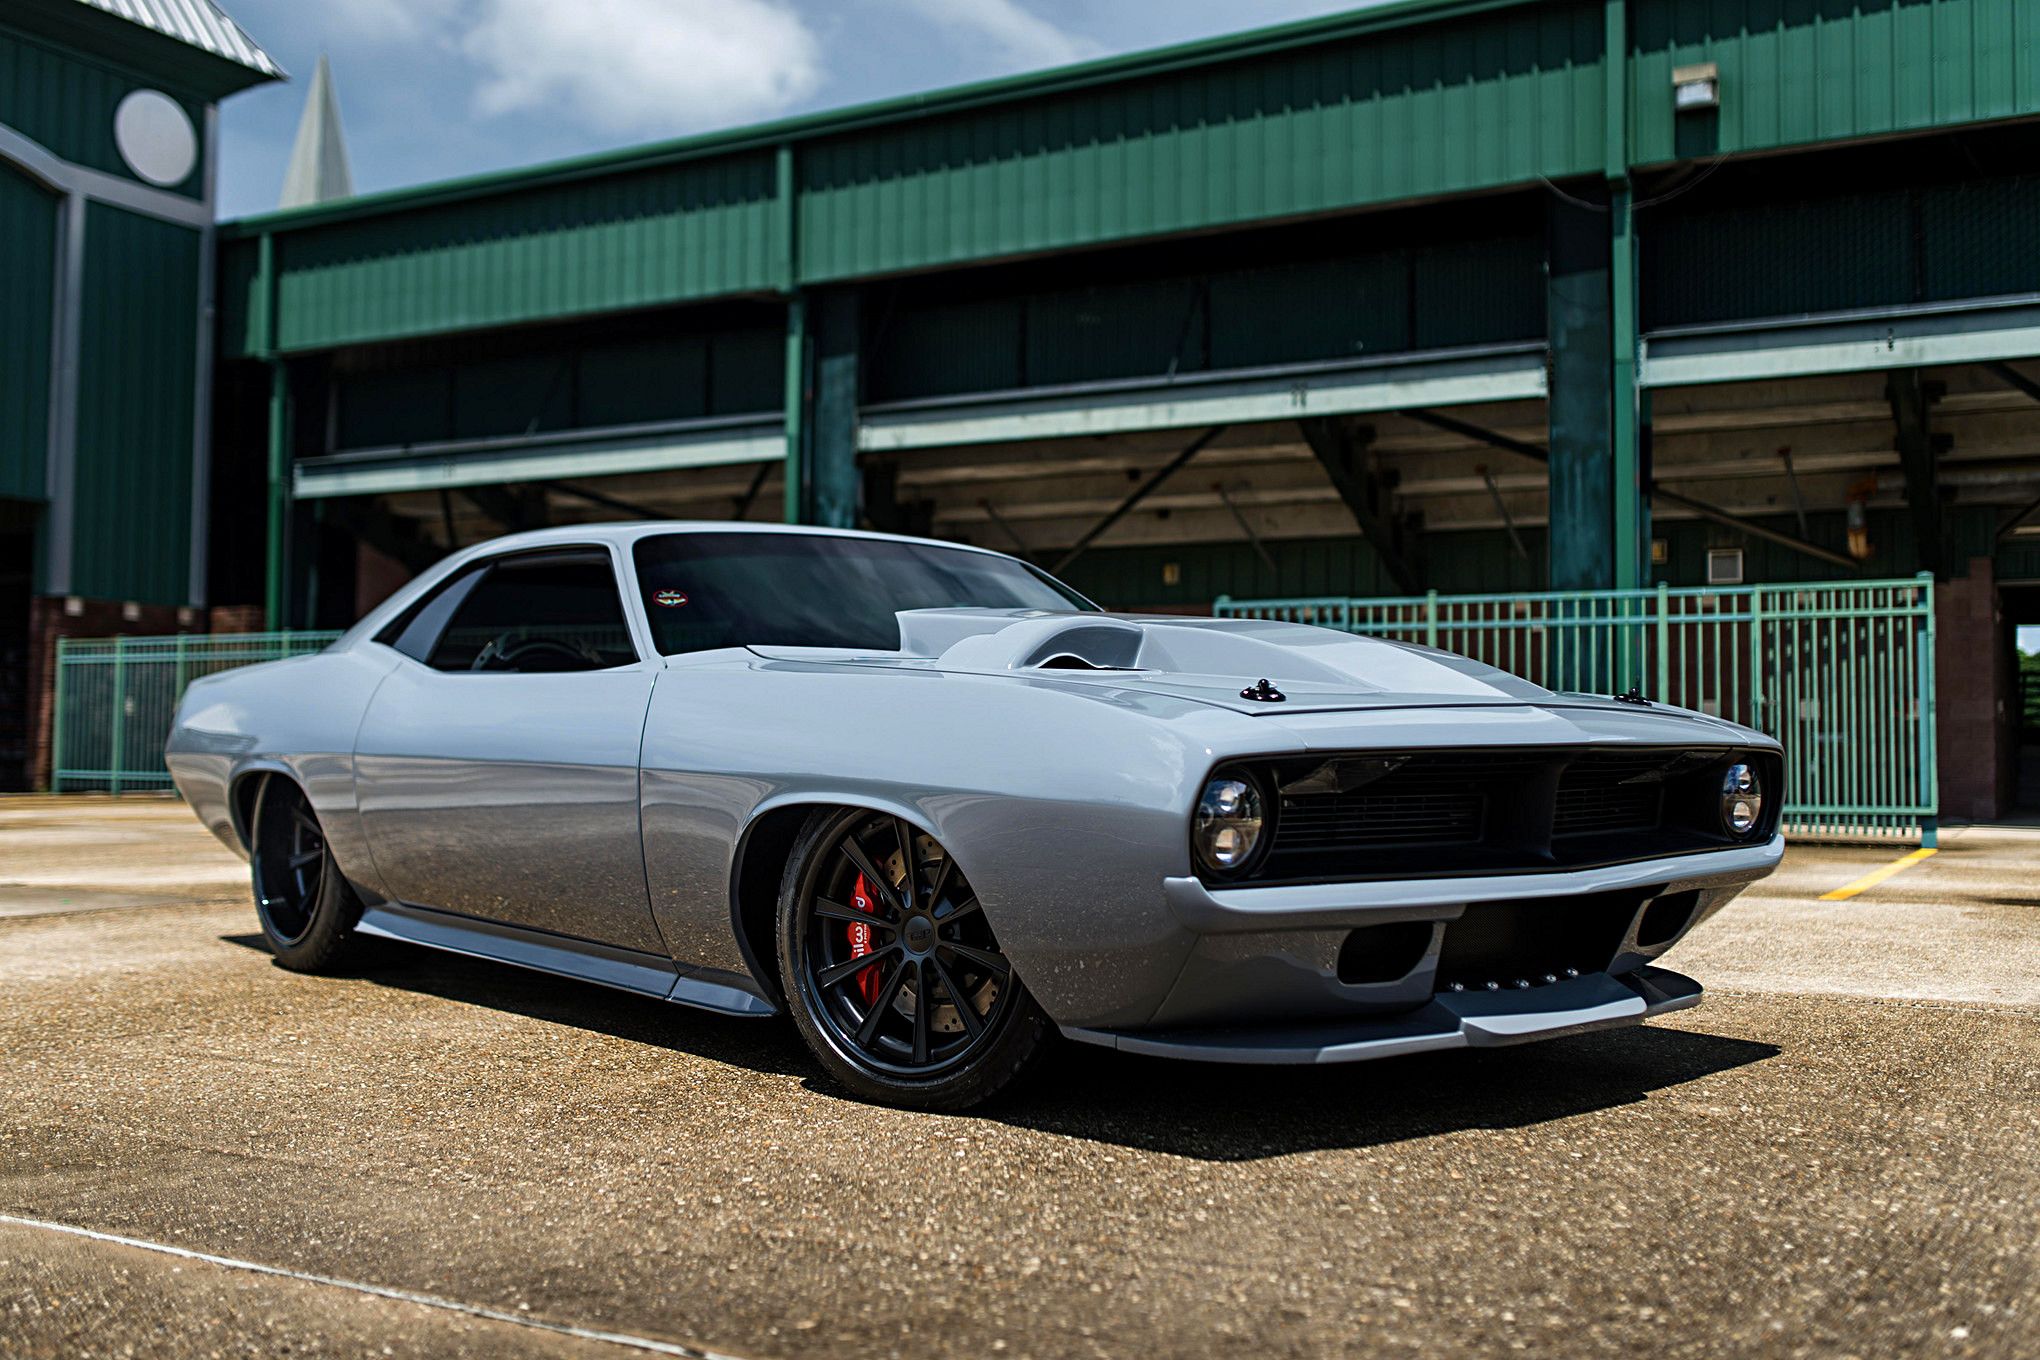 1970 Plymouth Barracuda ‘Torc’ parked